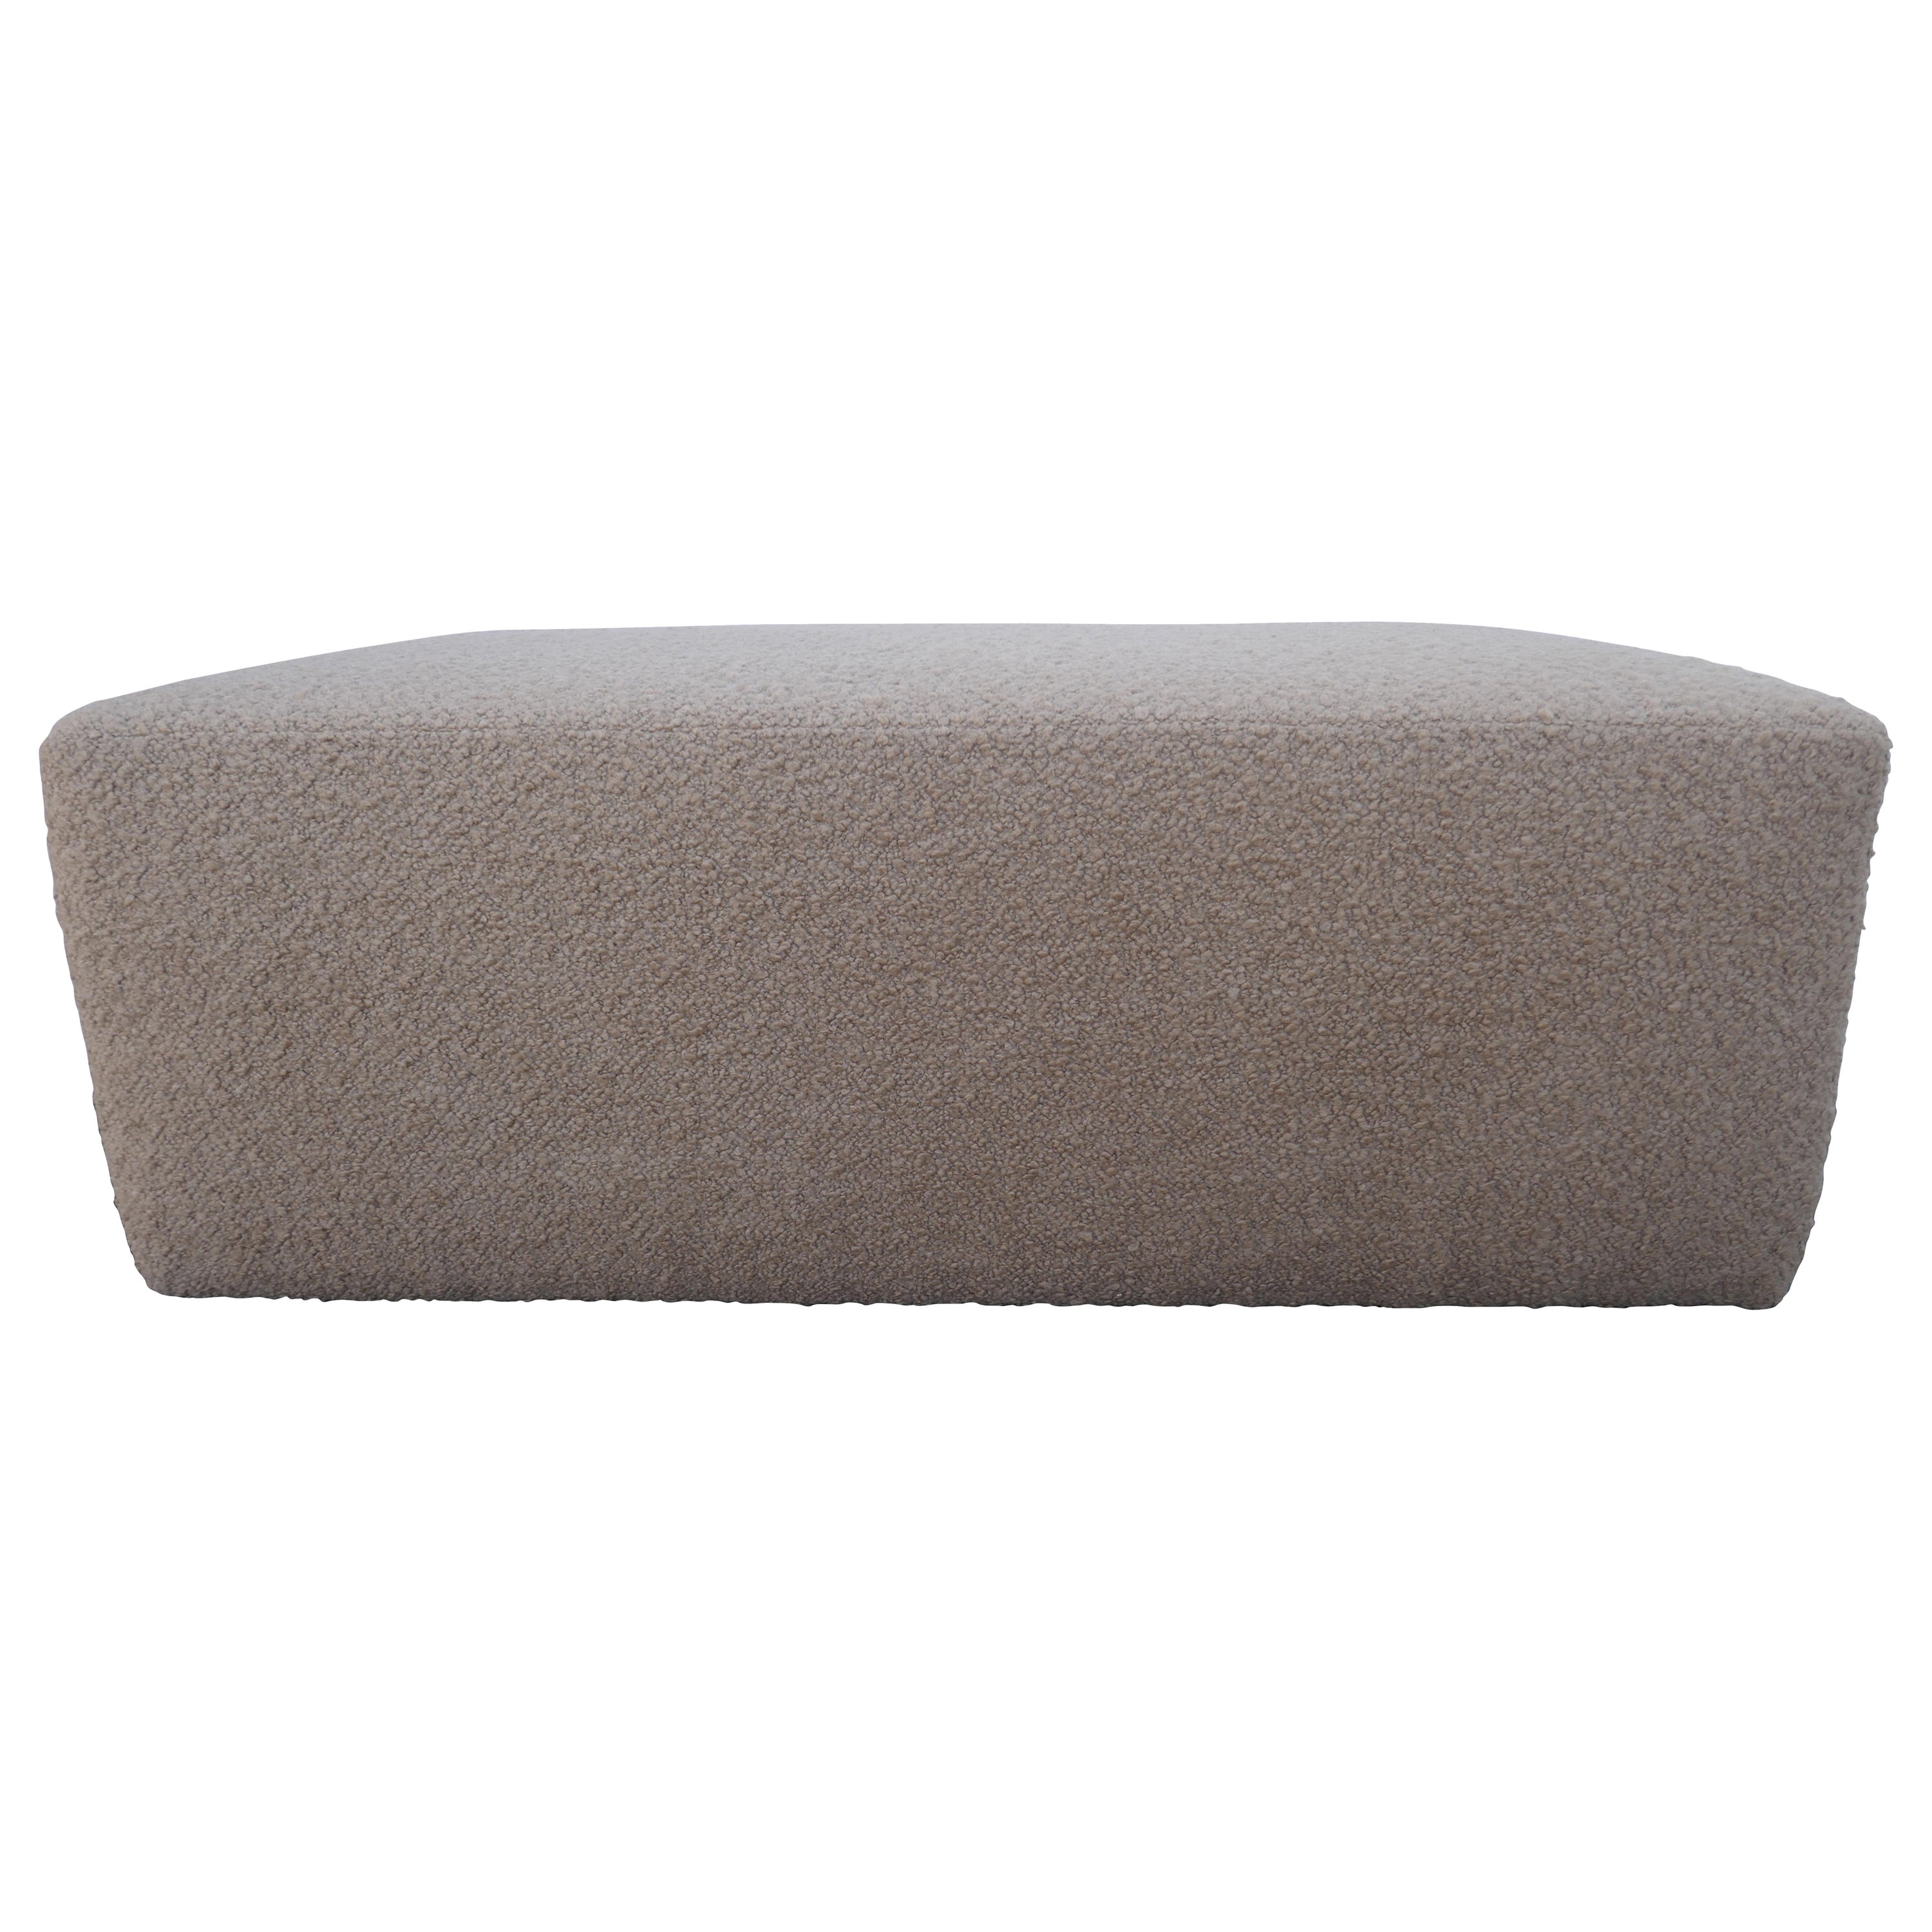 FI Ultra-Luxe Camel Shearling Ottoman, Large For Sale